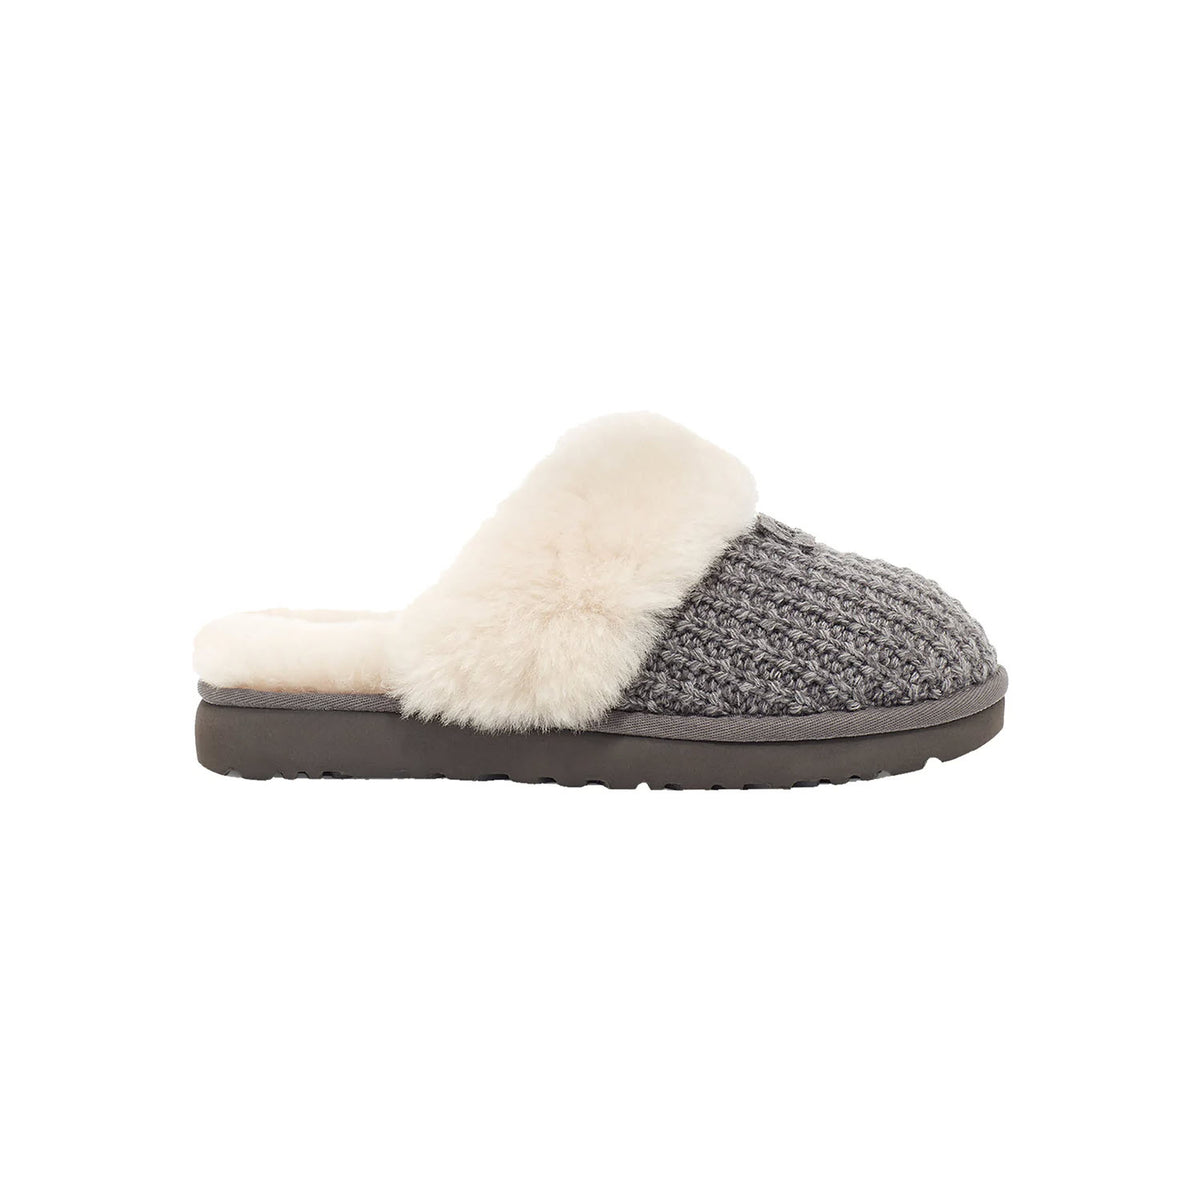 A gray knitted UGG Cozy Knit Charcoal women&#39;s slipper with a plush white sheepskin collar and a dark rubber sole, displayed against a white background.